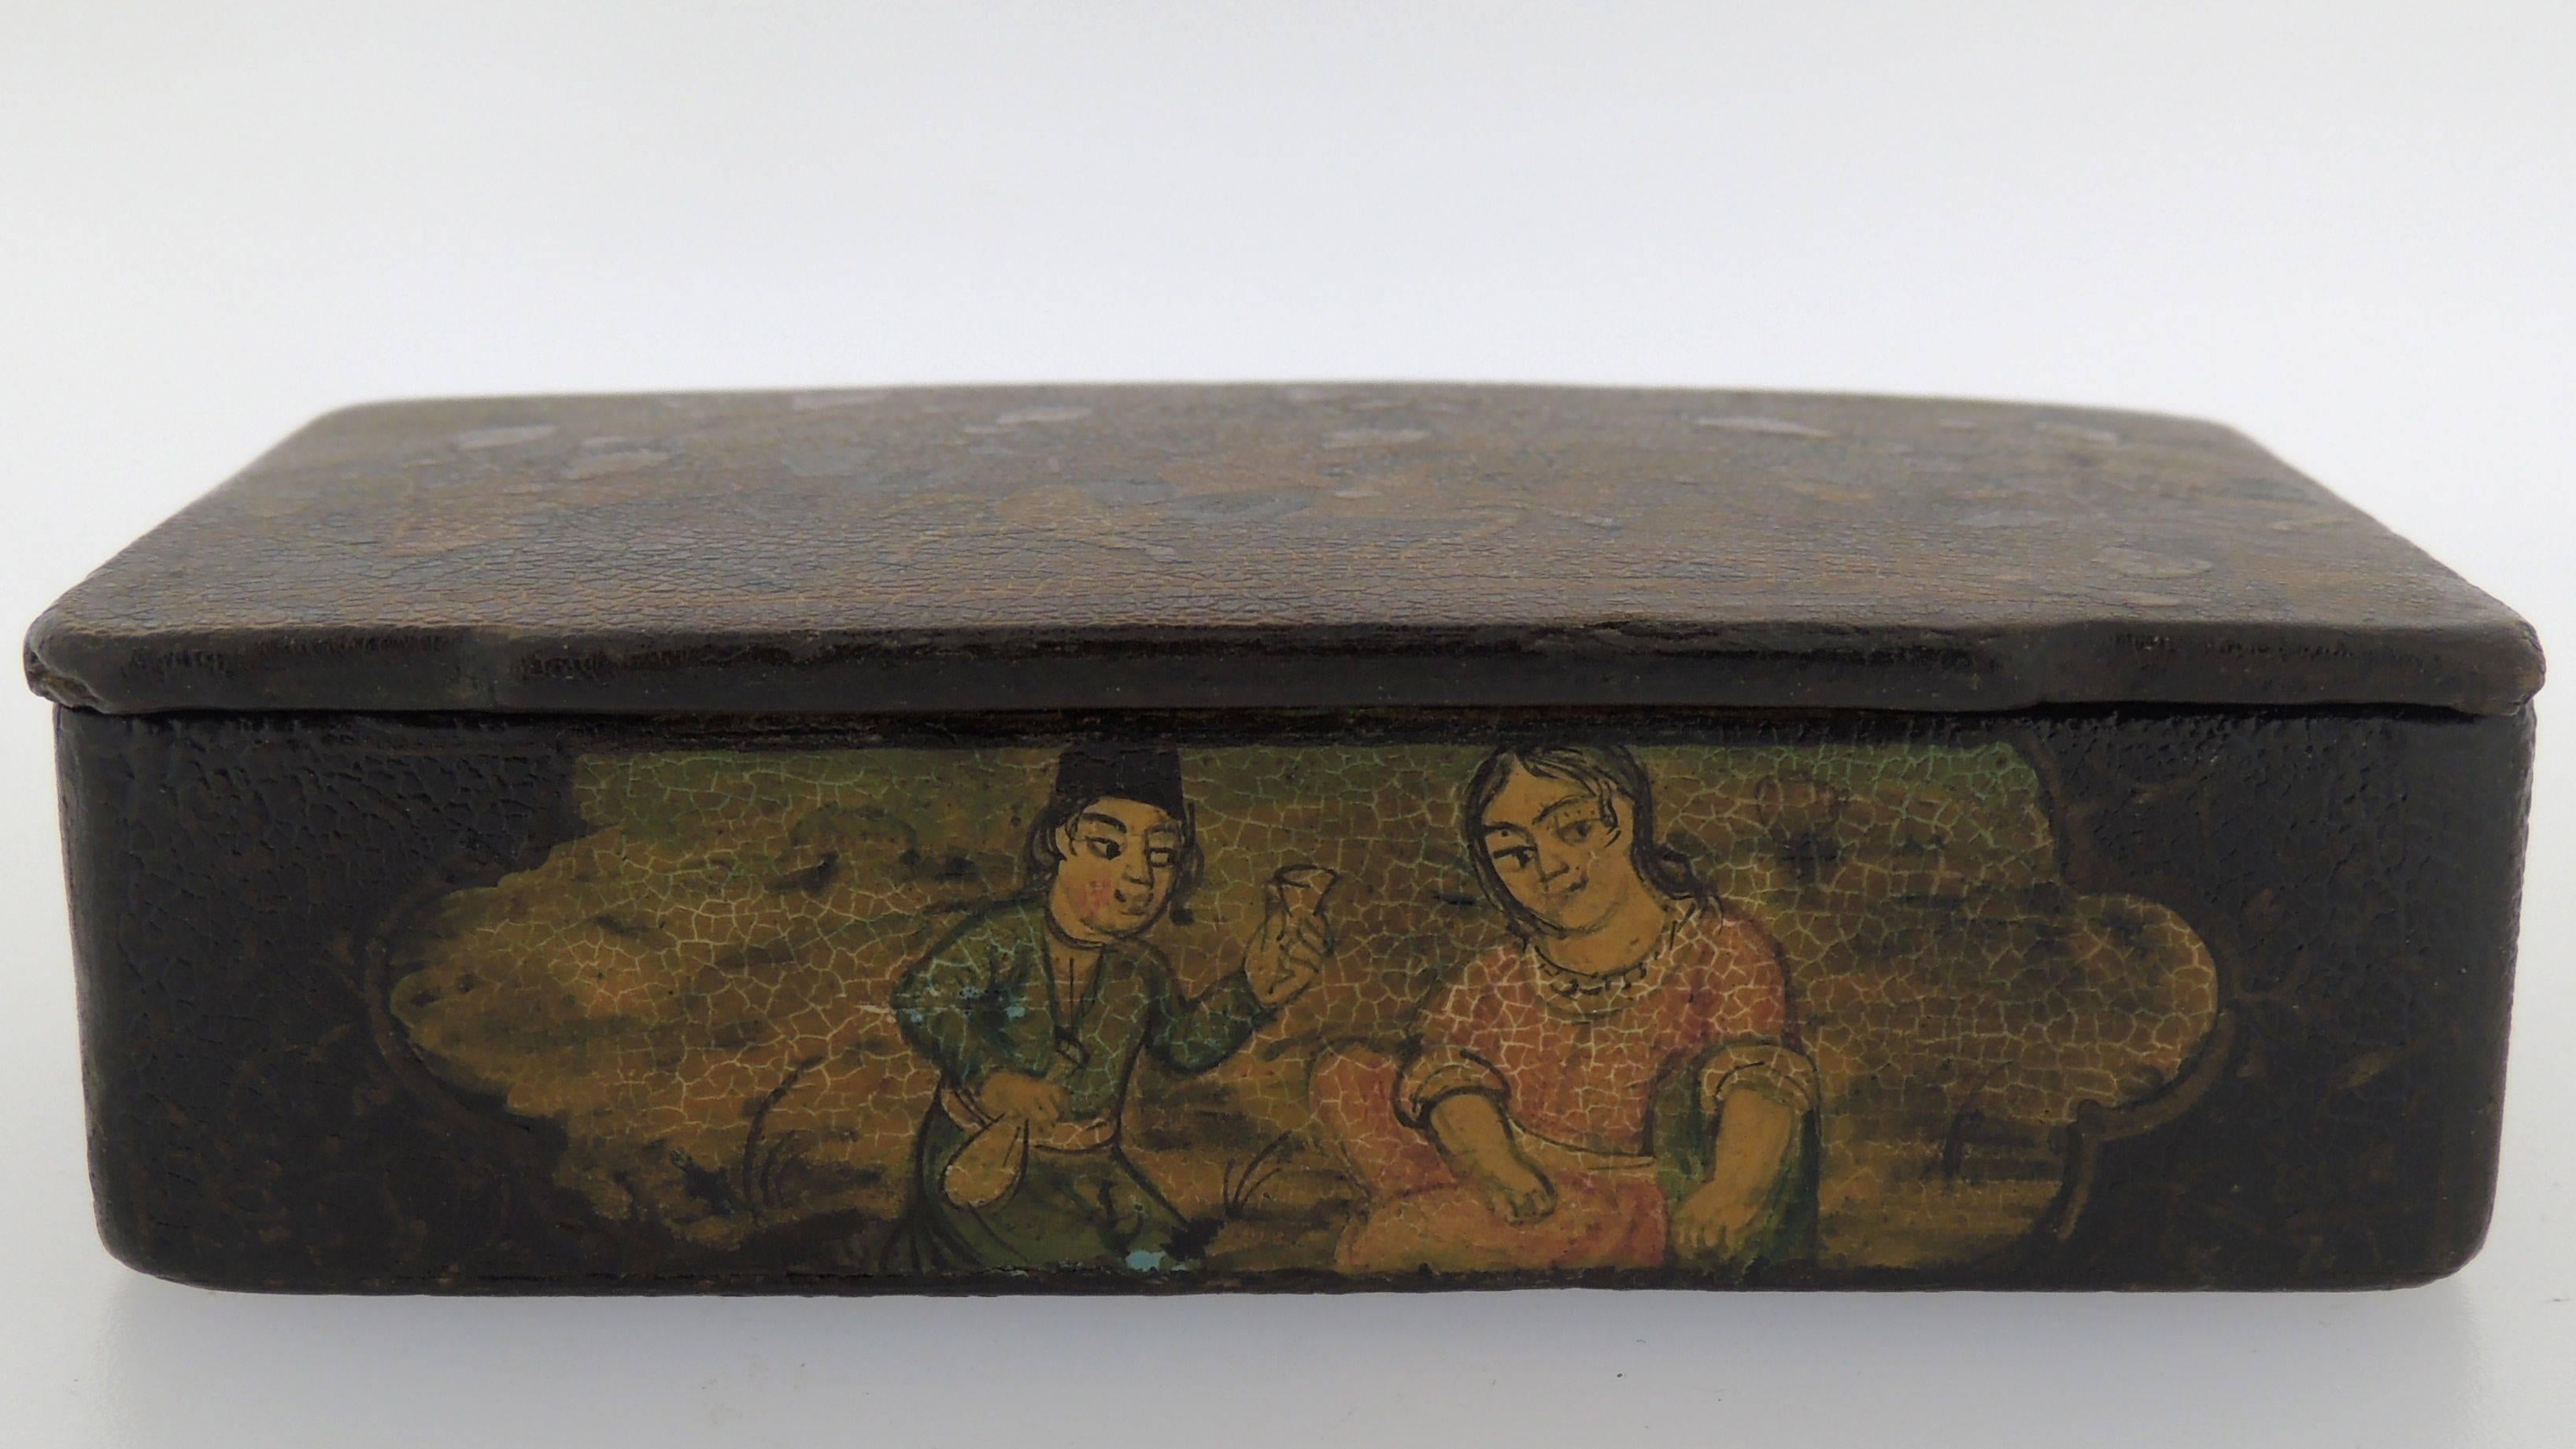 A fine antique Persian papier machê snuff box.

Consisting of a lacquered papier machê with decoration to the lid and all 4 sides. 

The lid of the box depicts numerous men on horseback playing Chovgan or Polo.

The front of the box shows a